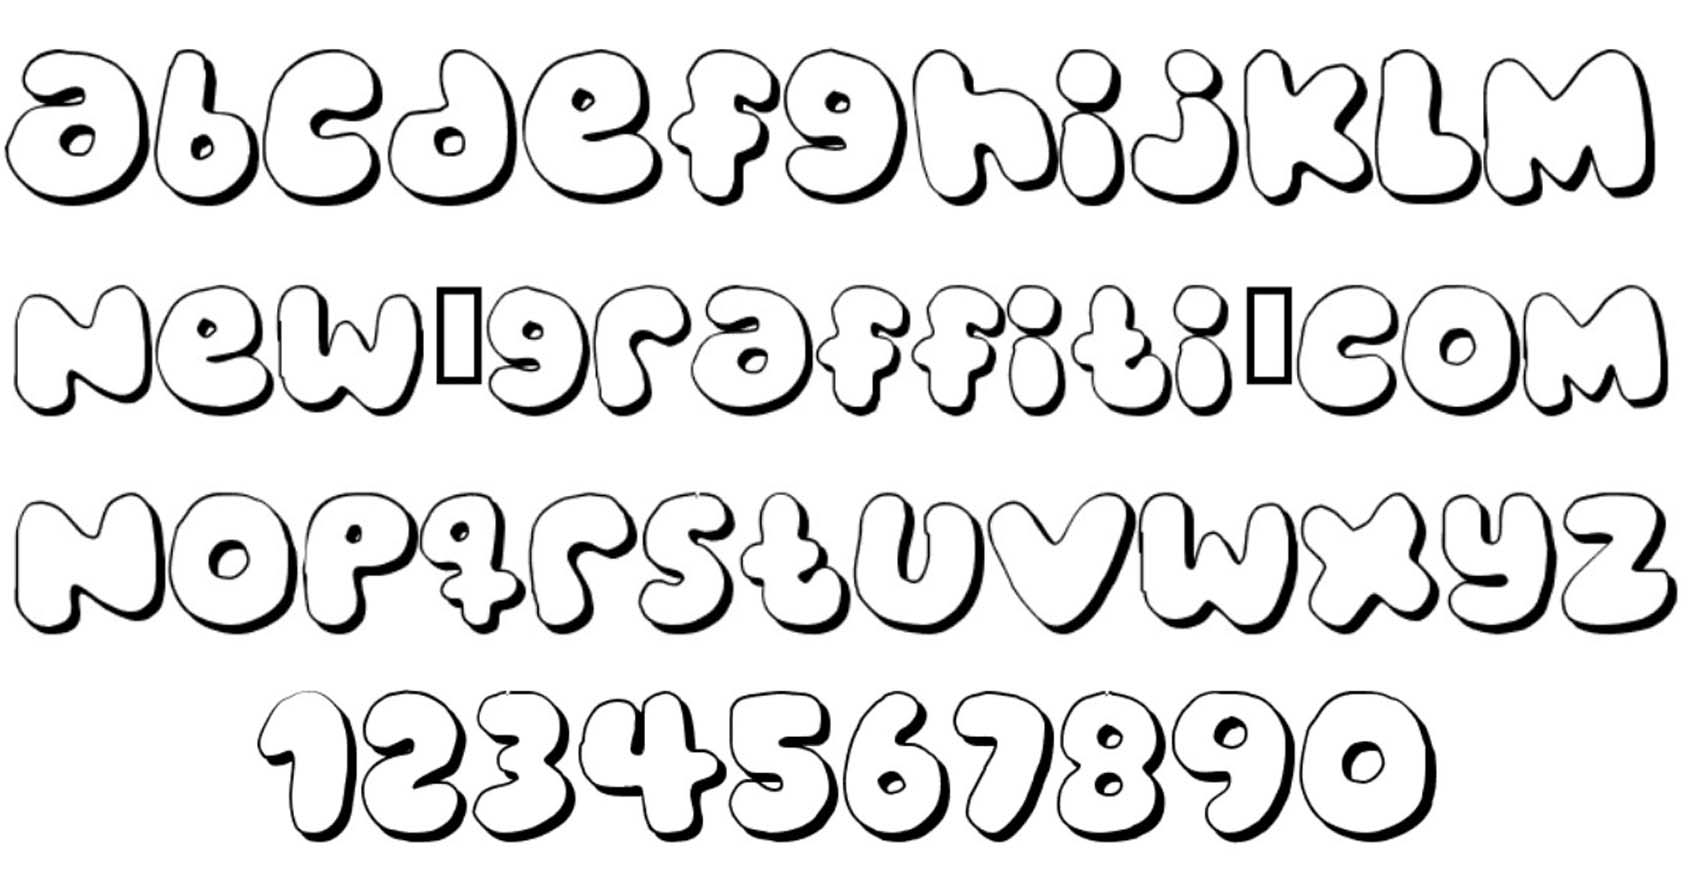 word font to make bubble letters